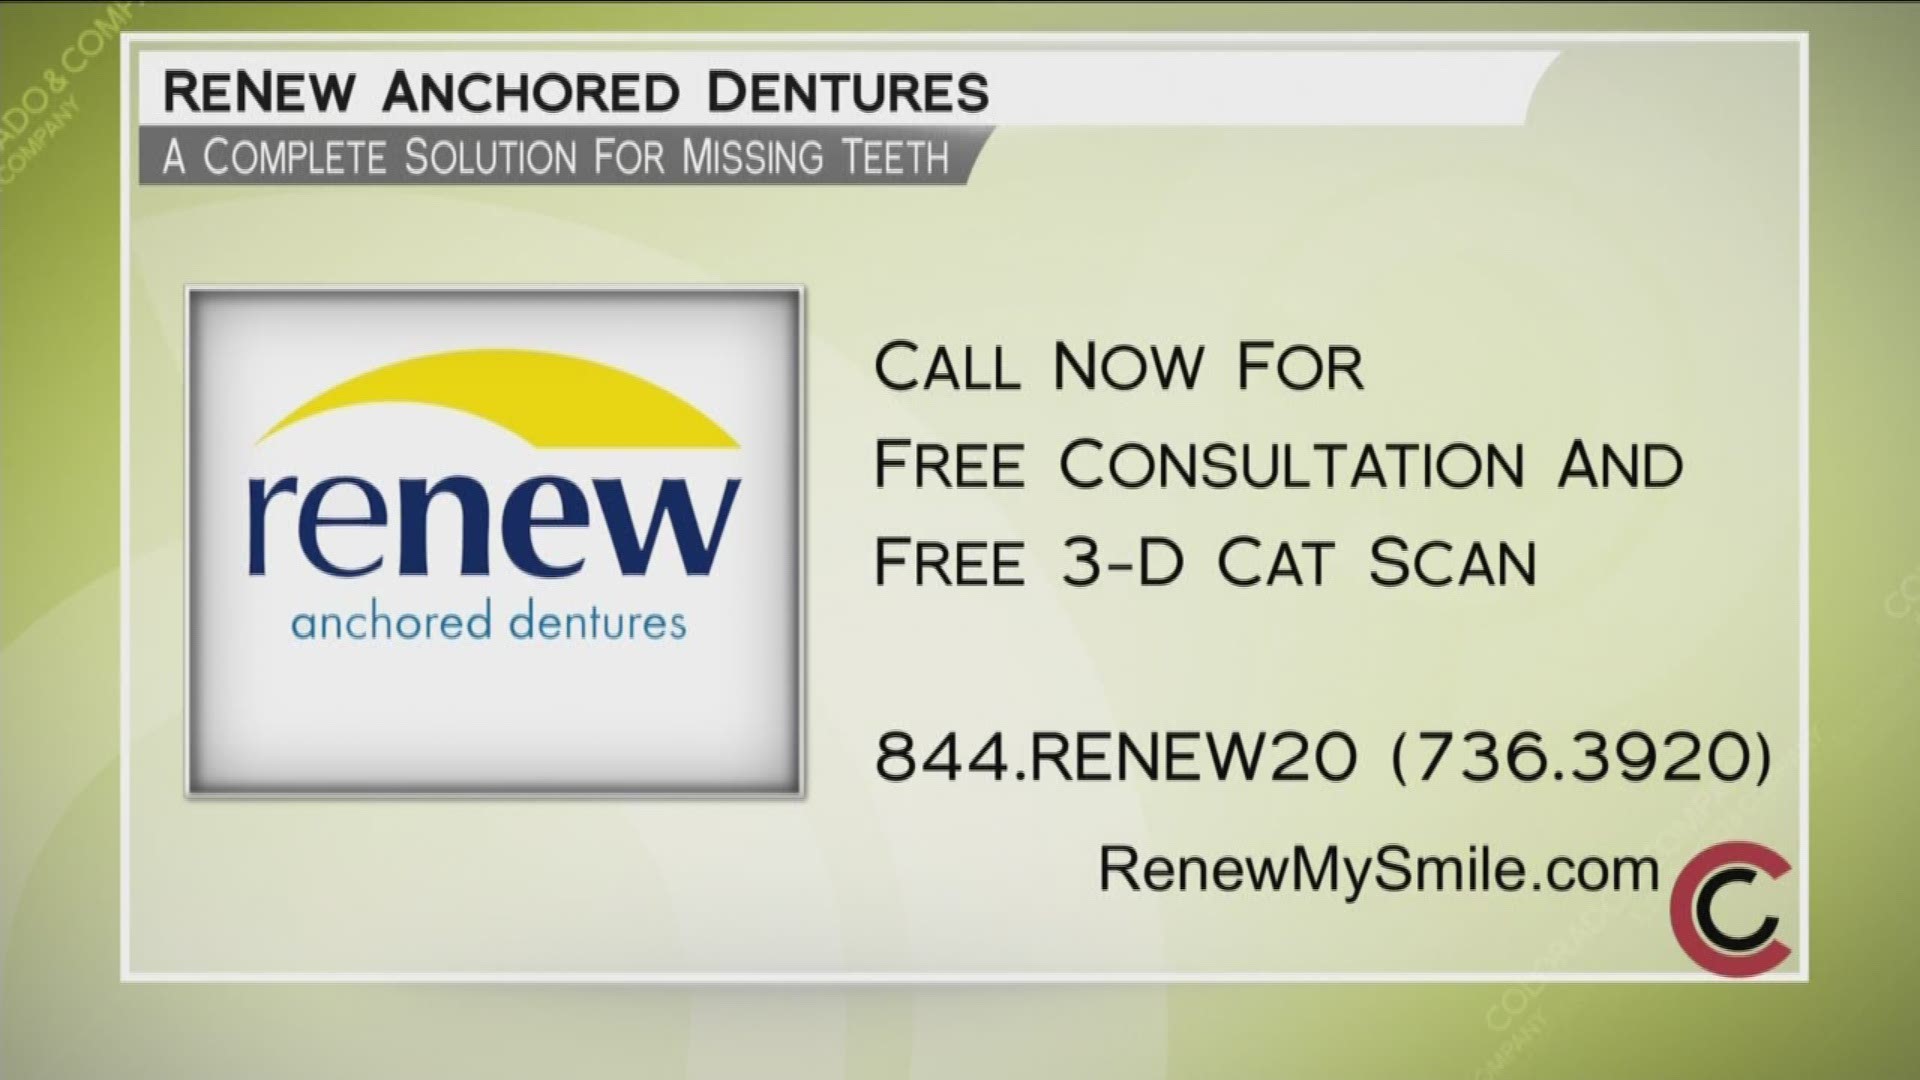 If you’re looking for a complete solution for missing teeth, call Renew for a free consultation and 3D CAT Scan. Eat, smile, and socialize with confidence. Call 844.RENEW.20, or visit them online at www.RenewMySmile.com. 
THIS INTERVIEW HAS COMMERCIAL CONTENT. PRODUCTS AND SERVICES FEATURED APPEAR AS PAID ADVERTISING.